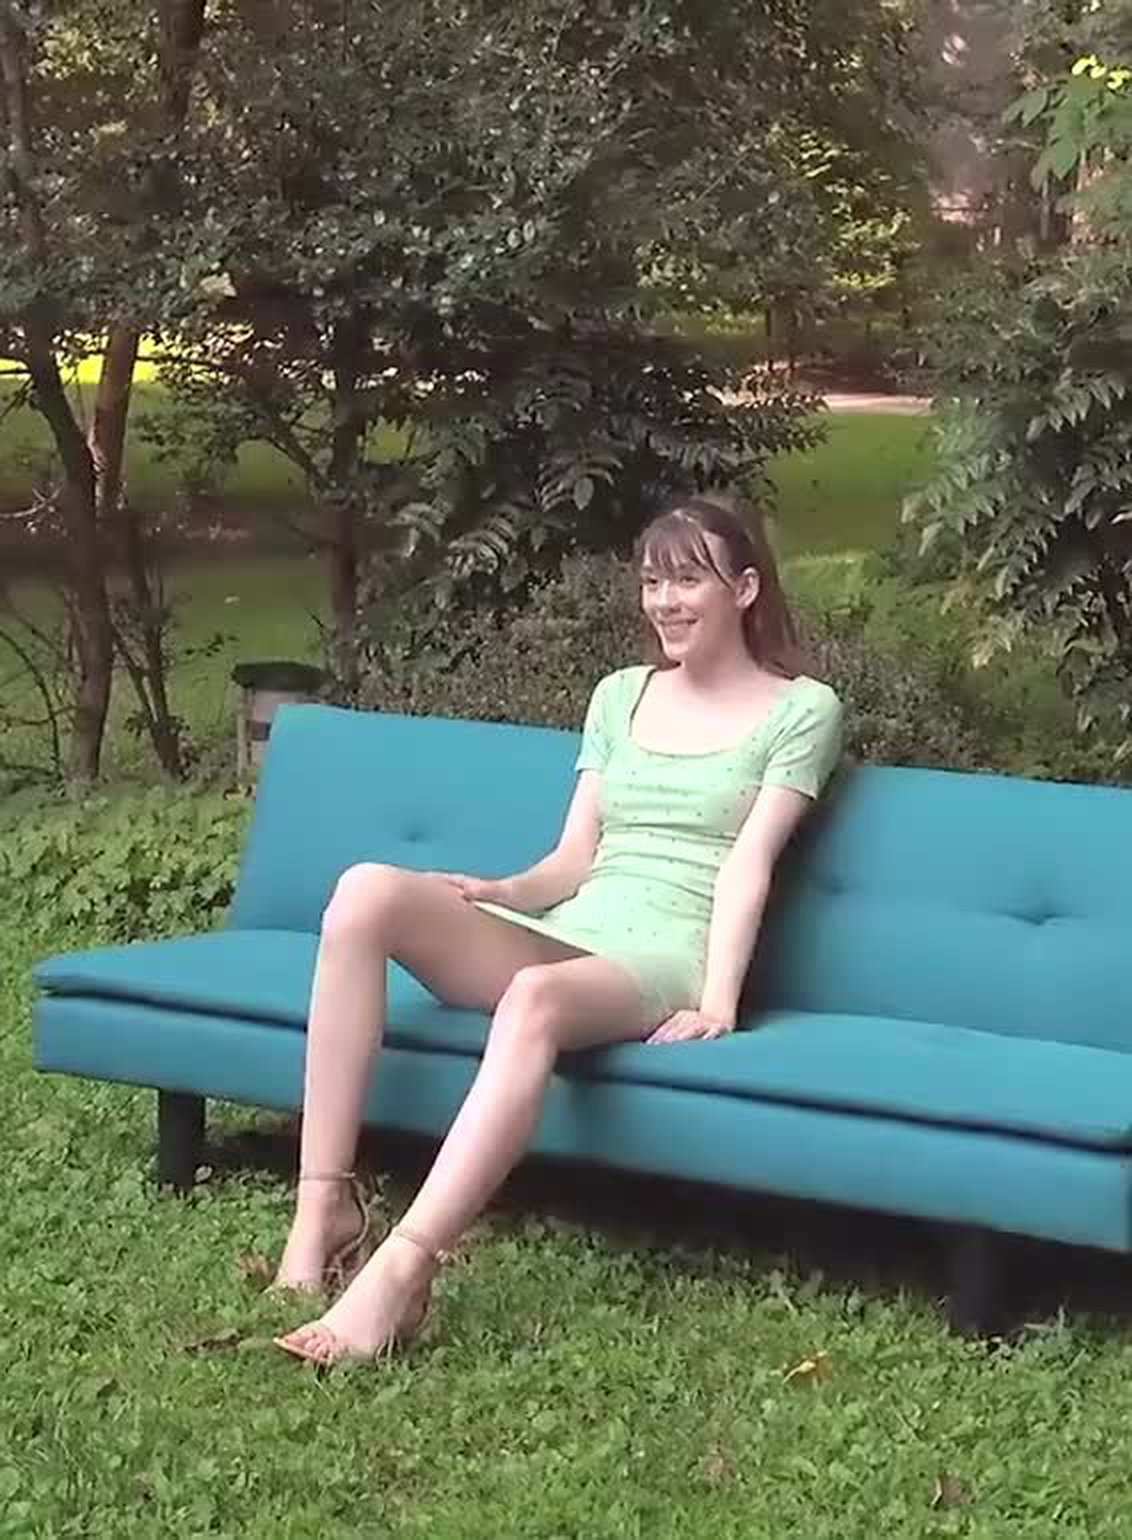 Naked casting of a fragile girl in an overgrown park